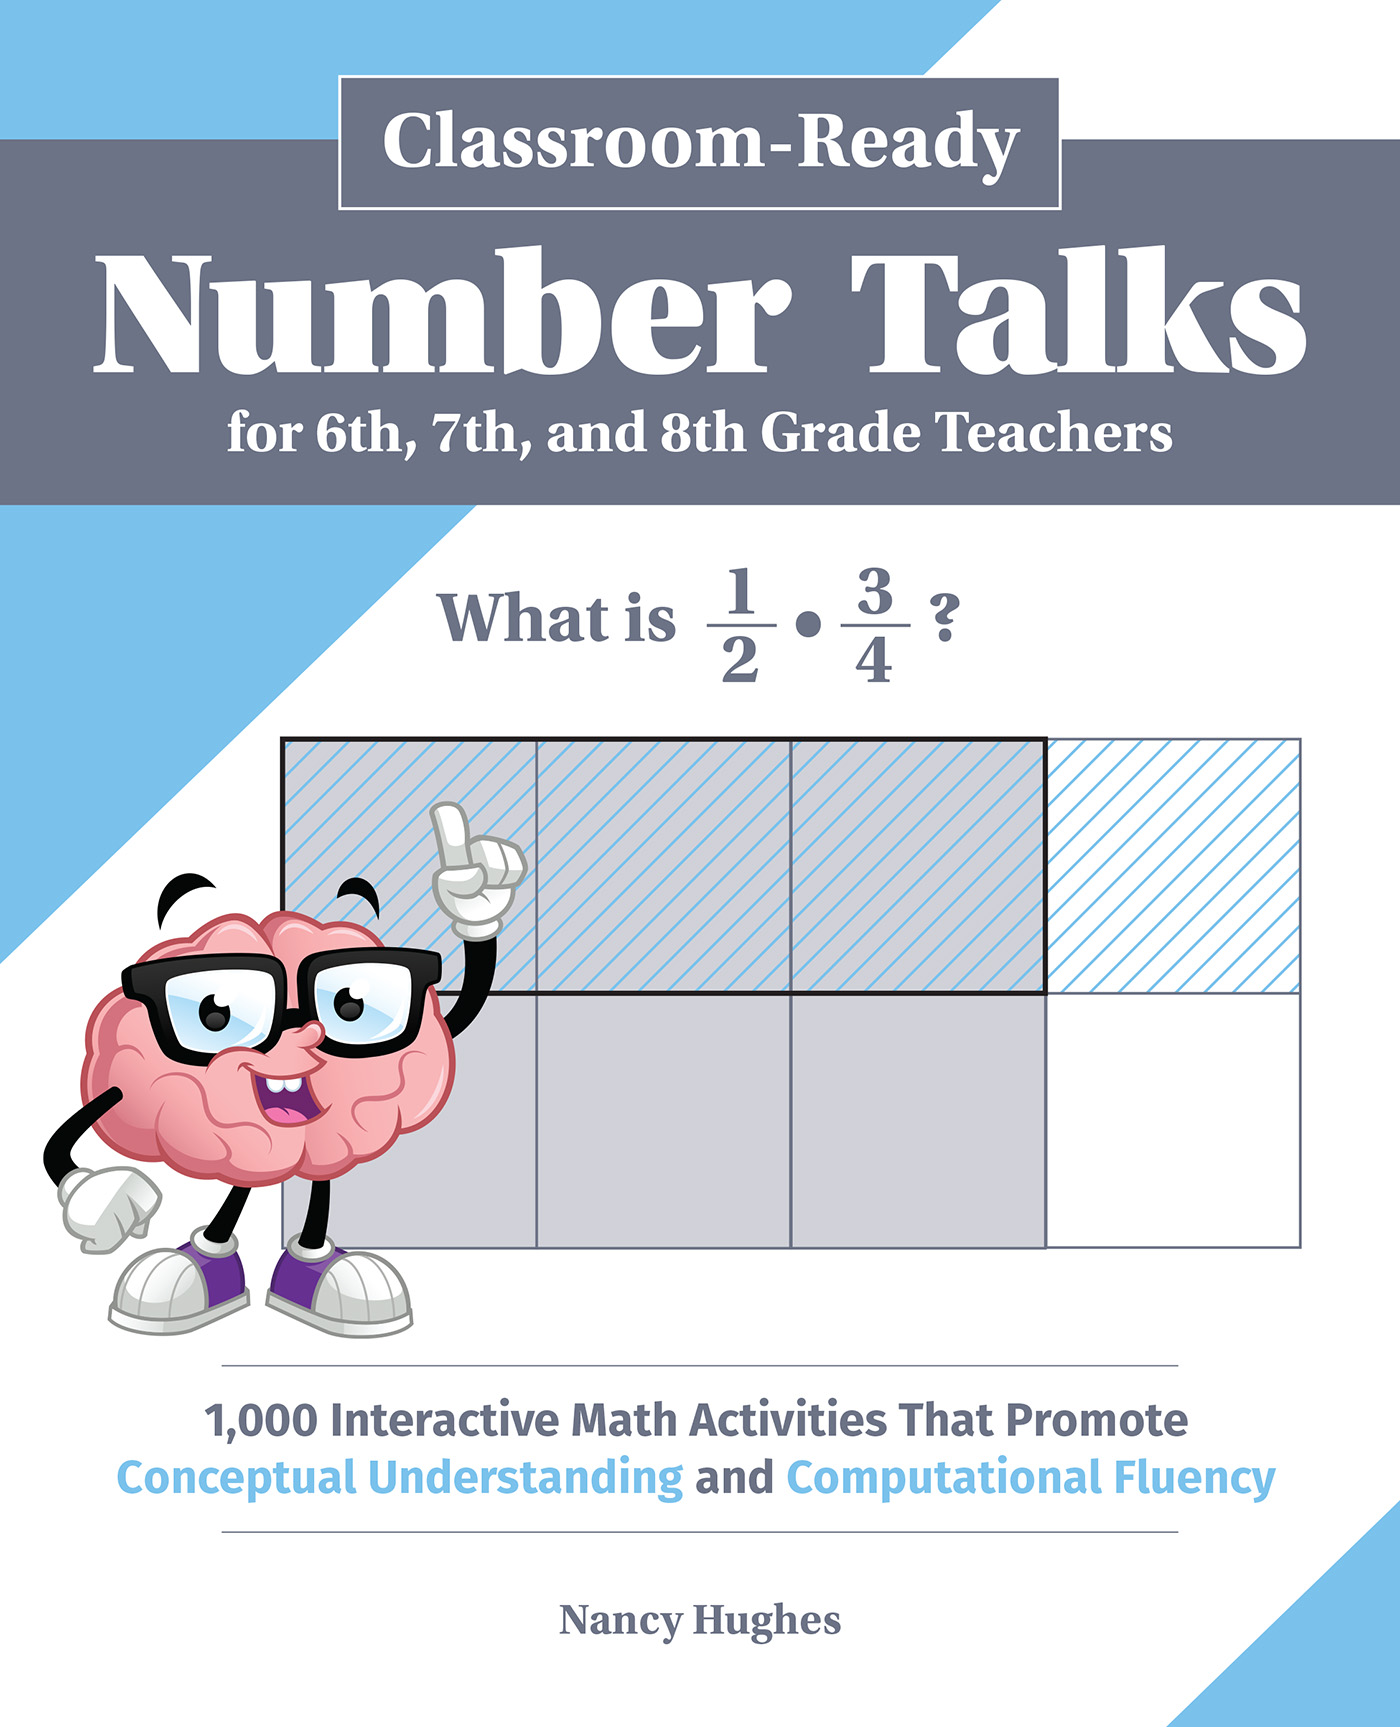 Classroom-Ready Number Talks for Sixth, Seventh, and Eighth Grade Teachers